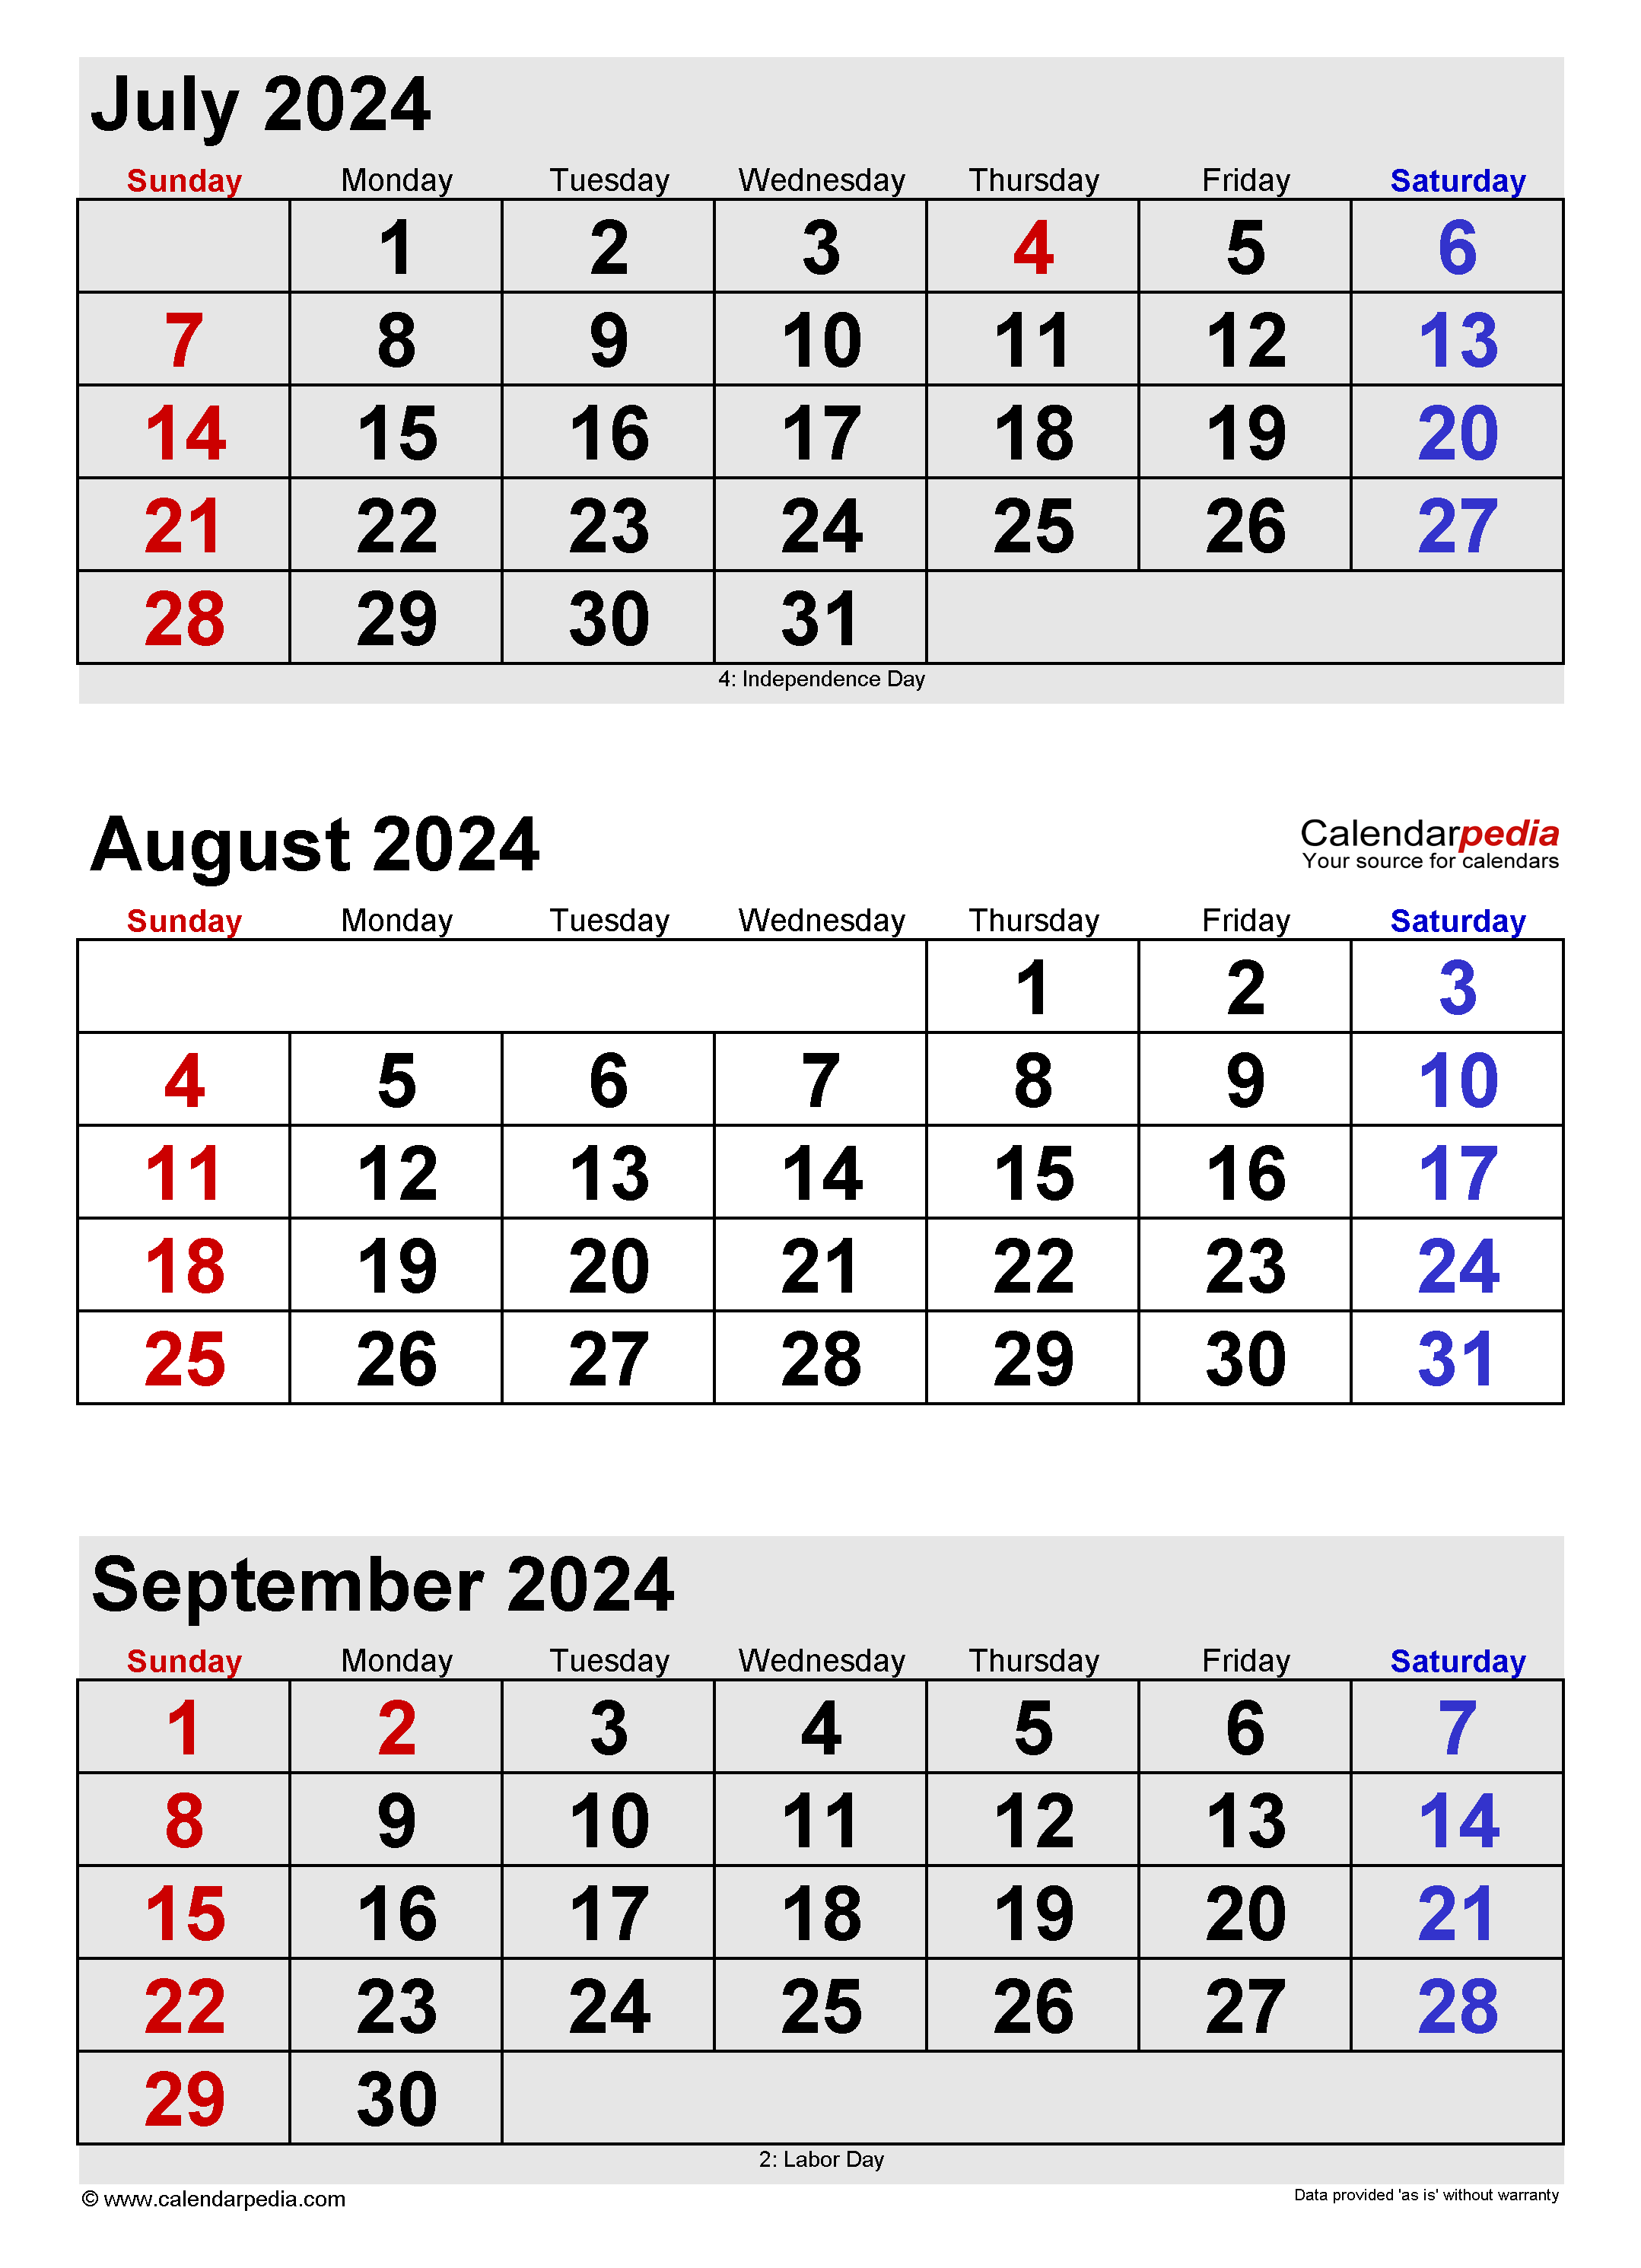 August 2024 Calendar | Templates For Word, Excel And Pdf pertaining to Calendar 2024 July August September